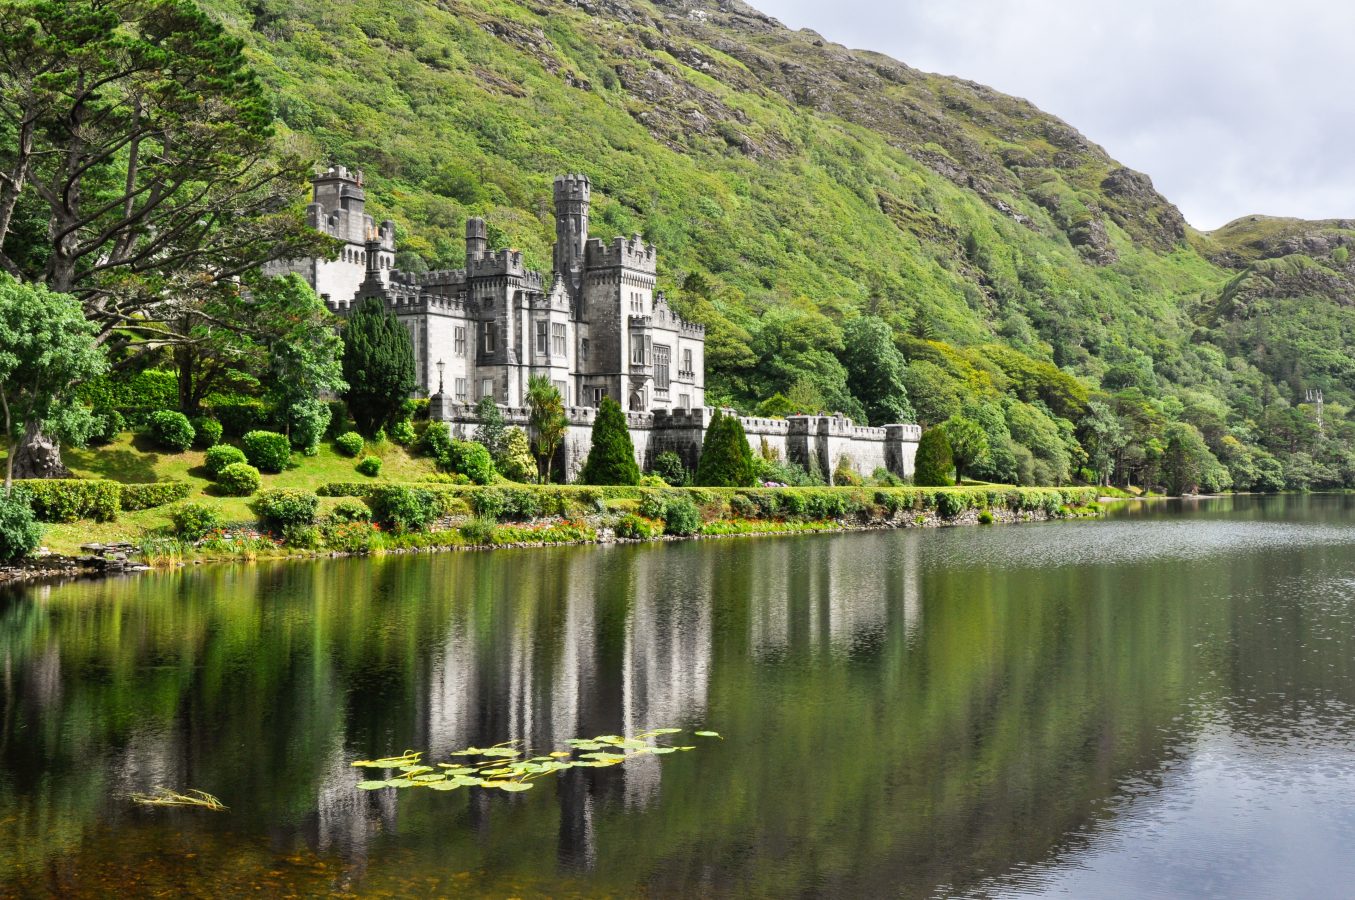 Kylemore Abbey in the Connemara mountains, Ireland. Ireland is a popular destination for students going on study abroad programs.